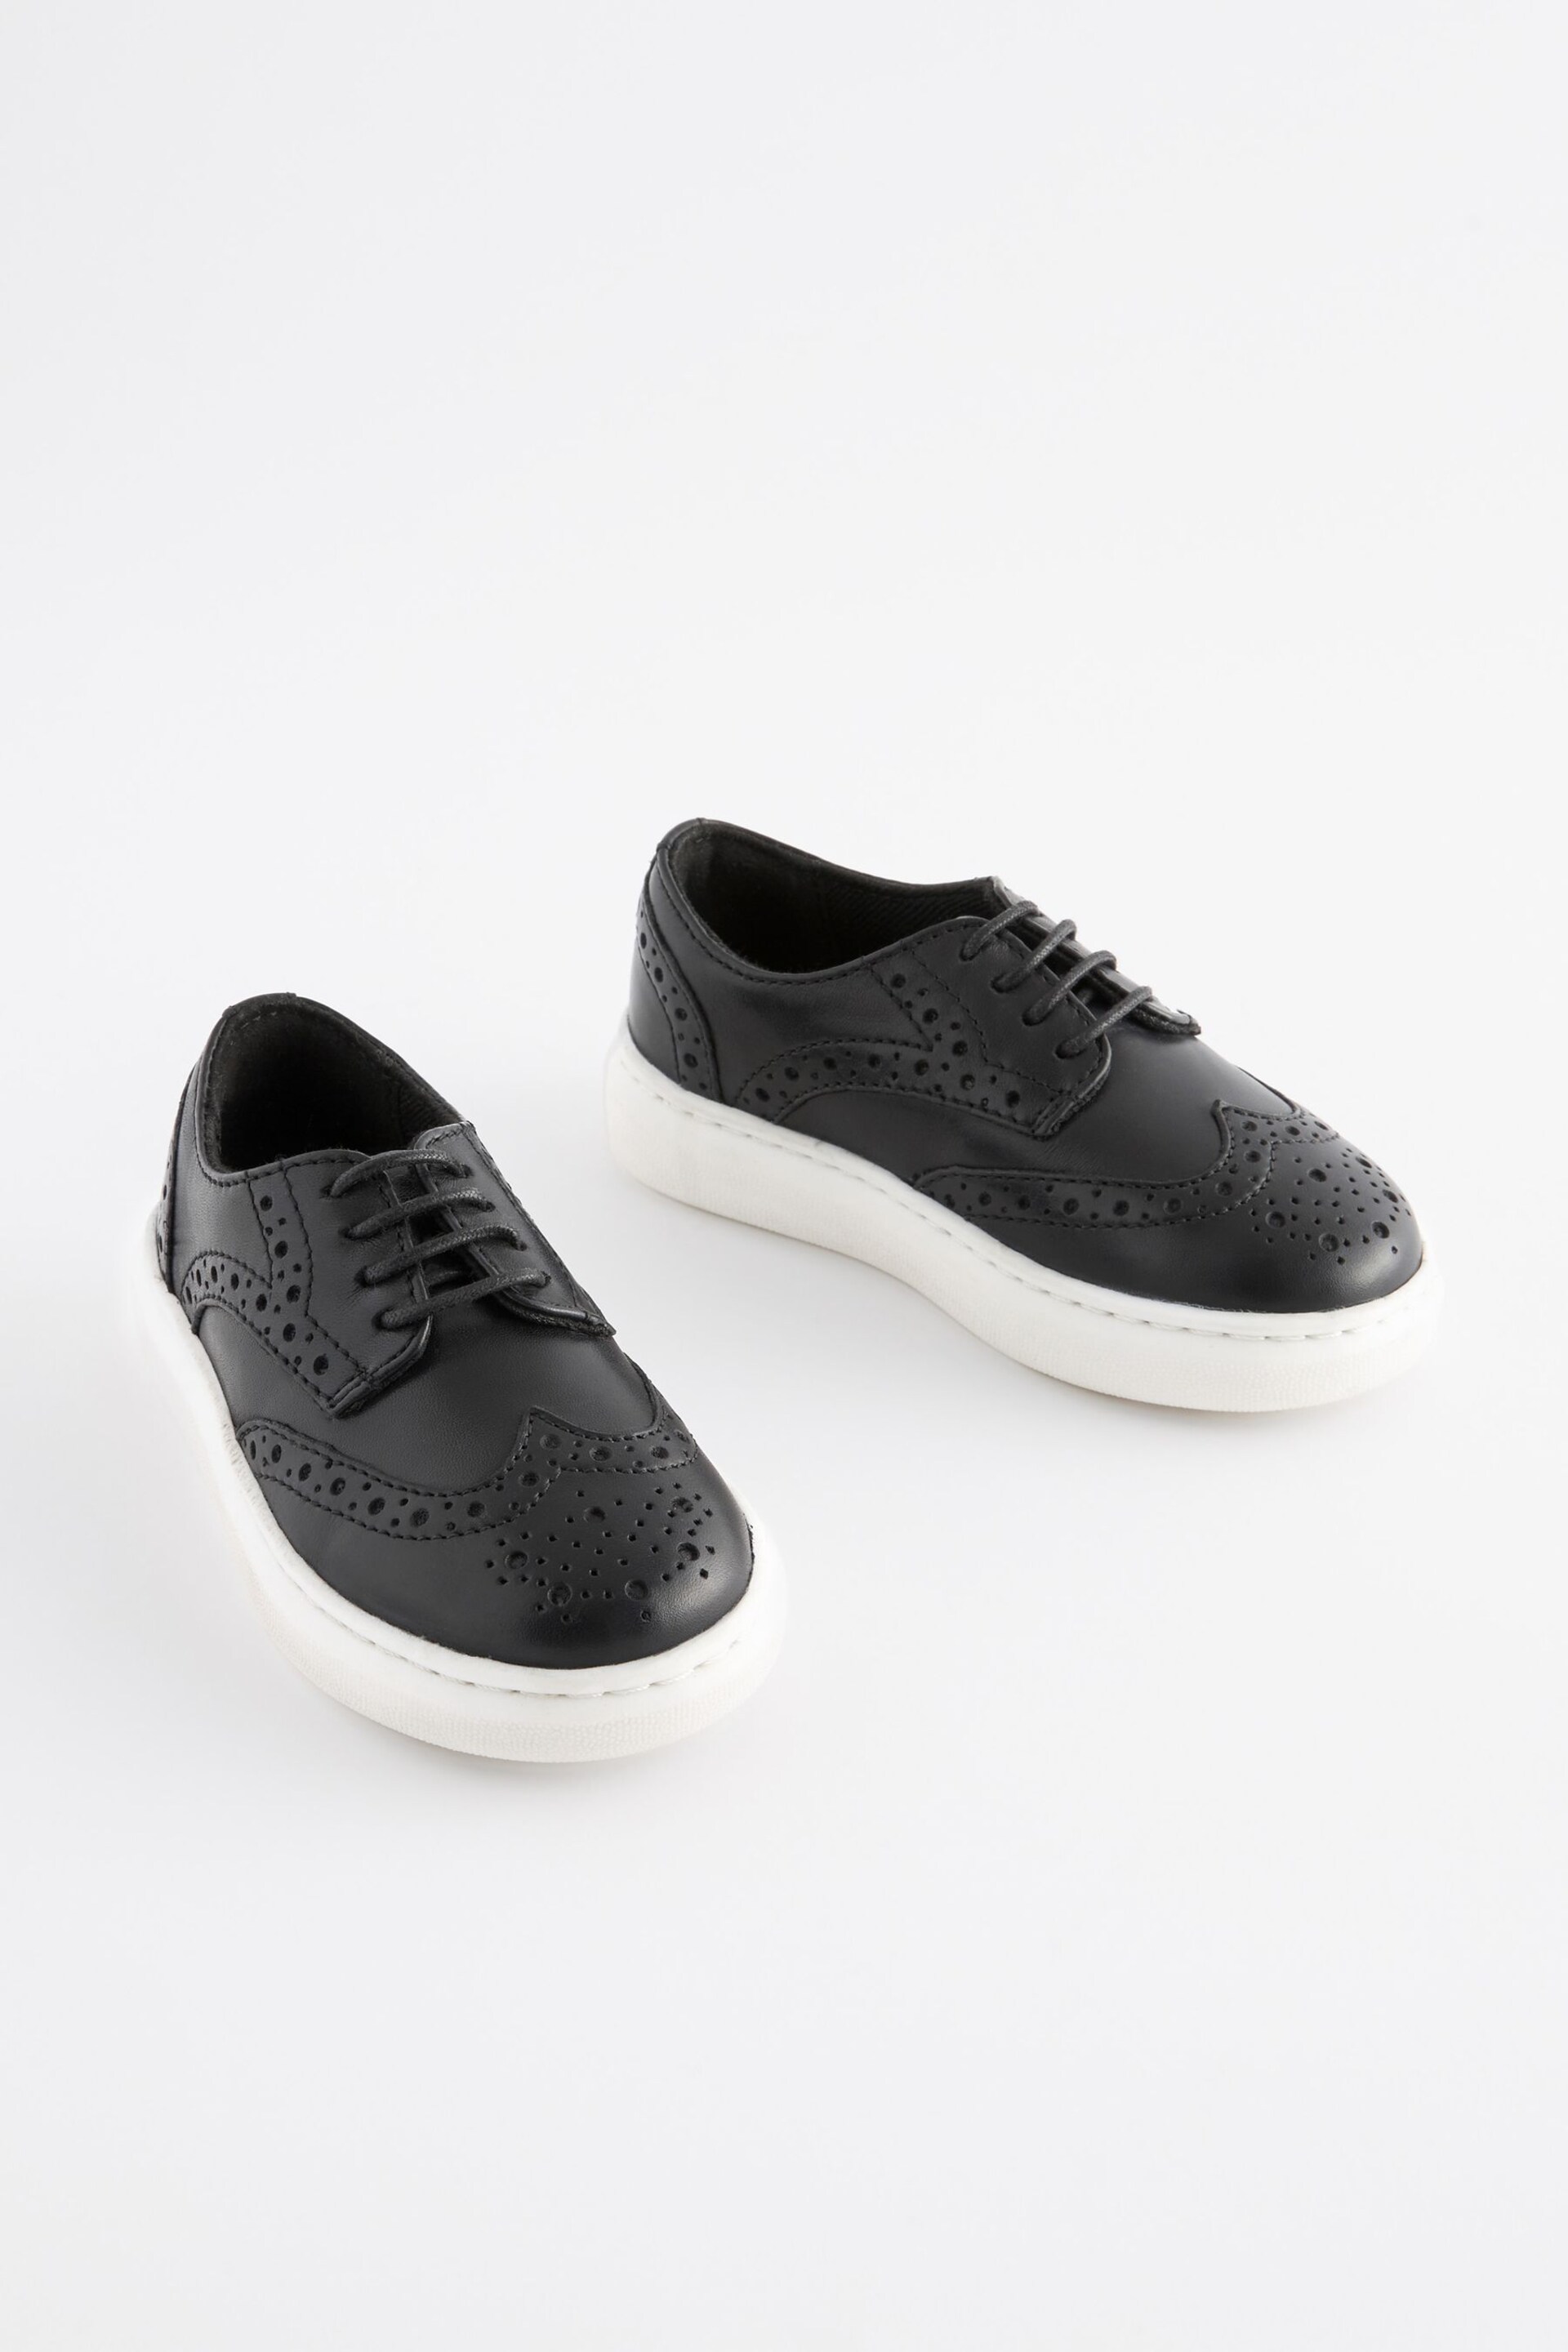 Black Brogue Smart Leather Lace-Up Shoes - Image 1 of 6